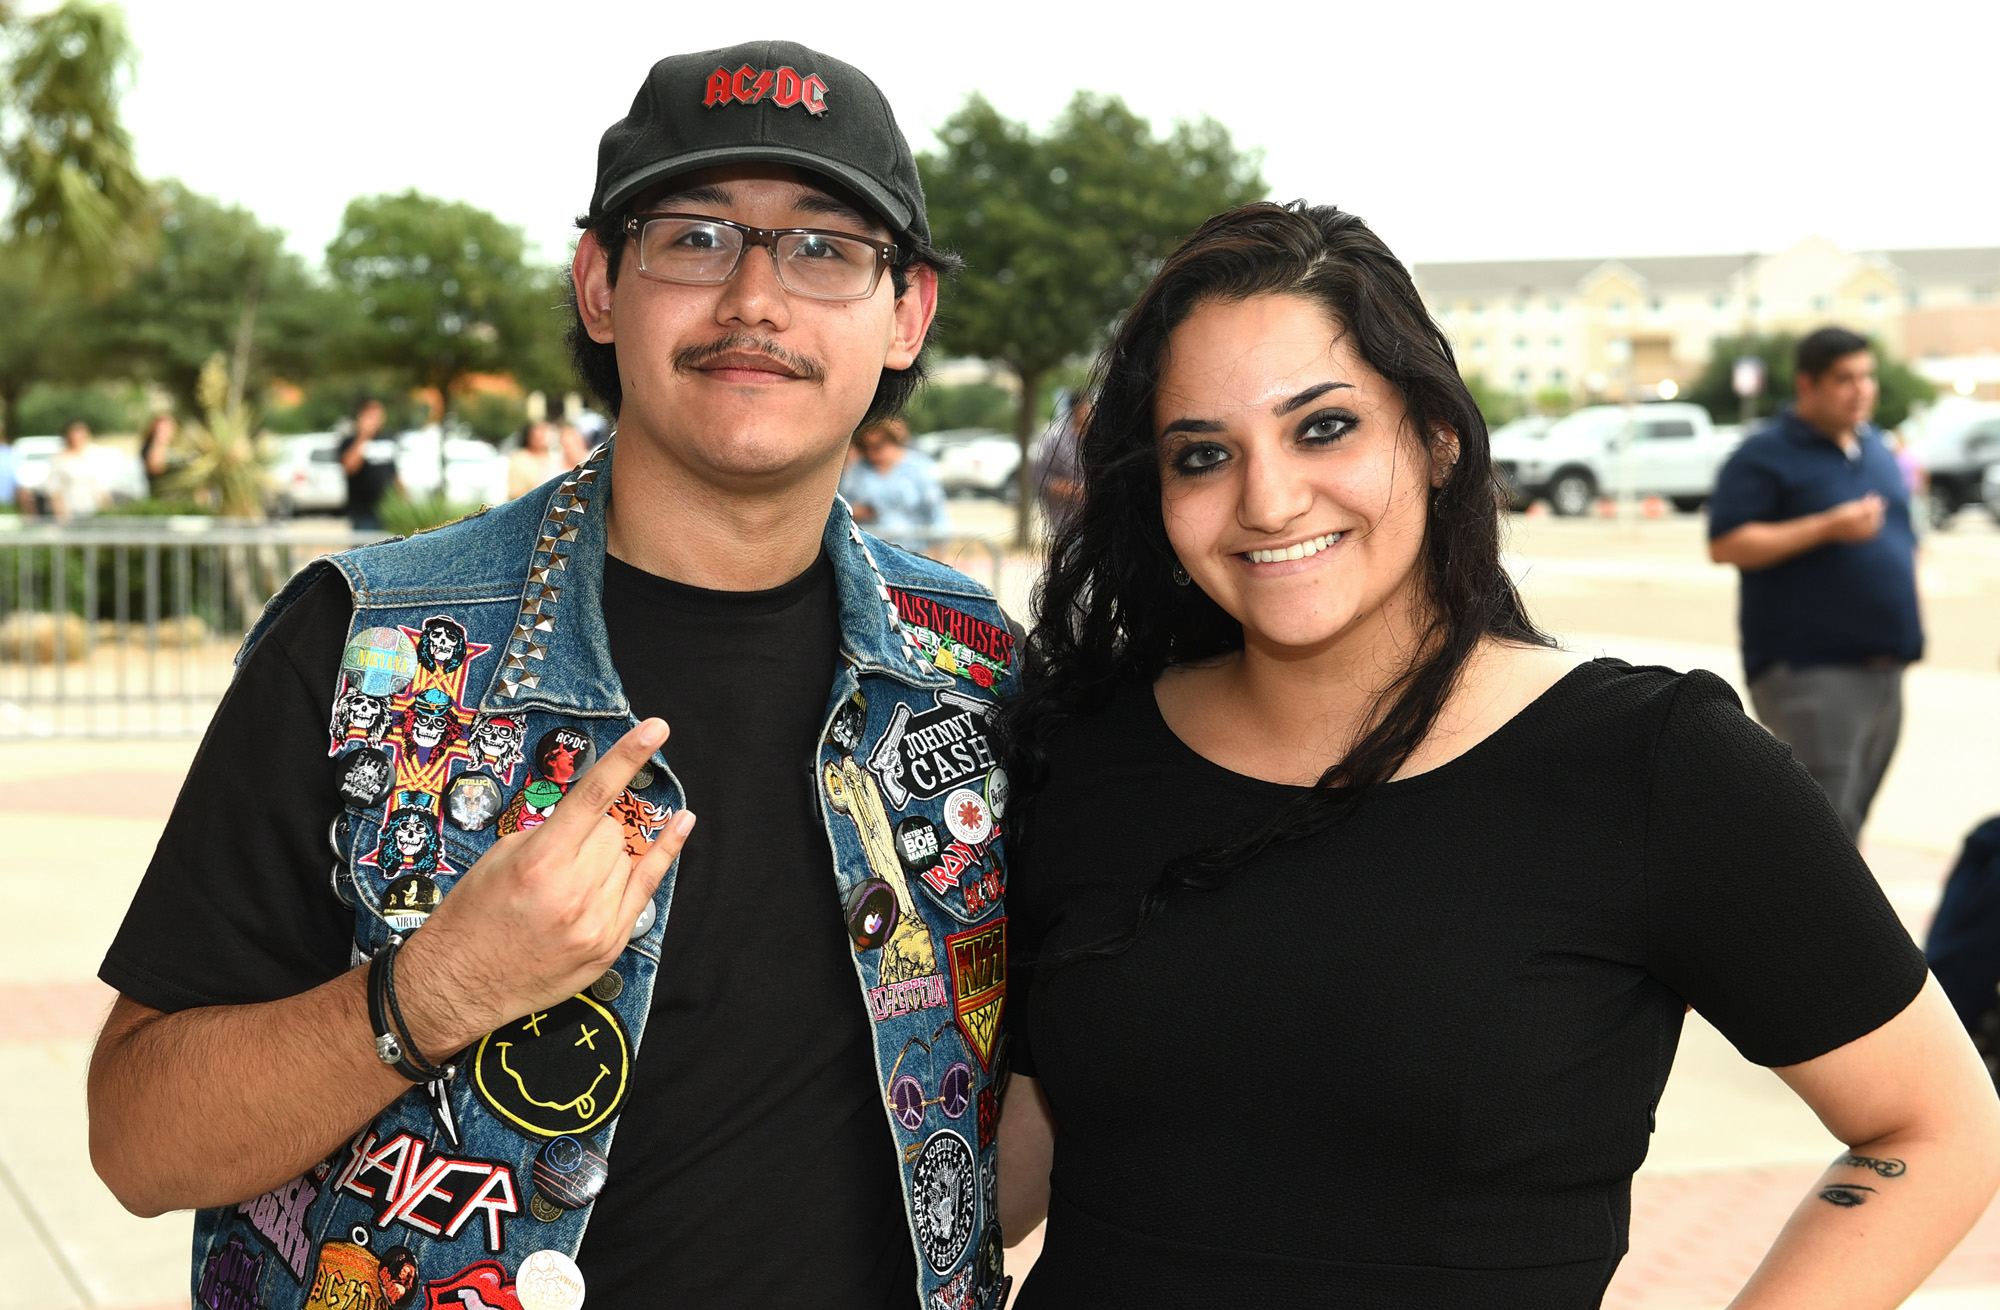 Photos show Laredo's social scene and events throughout the summer 2017